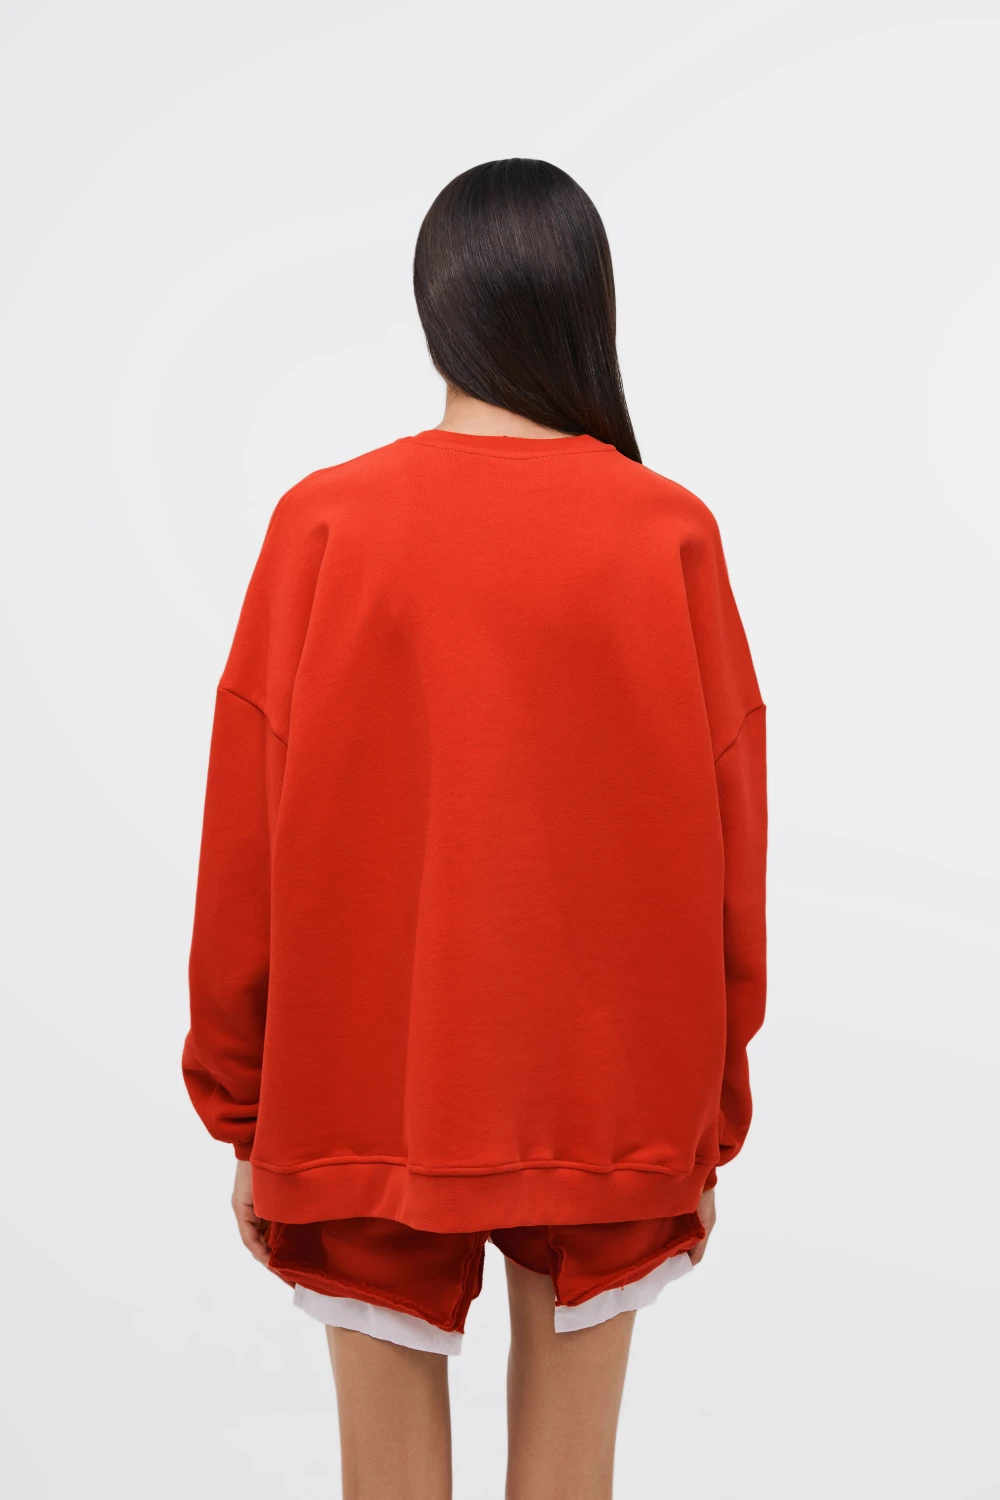 sweatshirt "basic" in red color